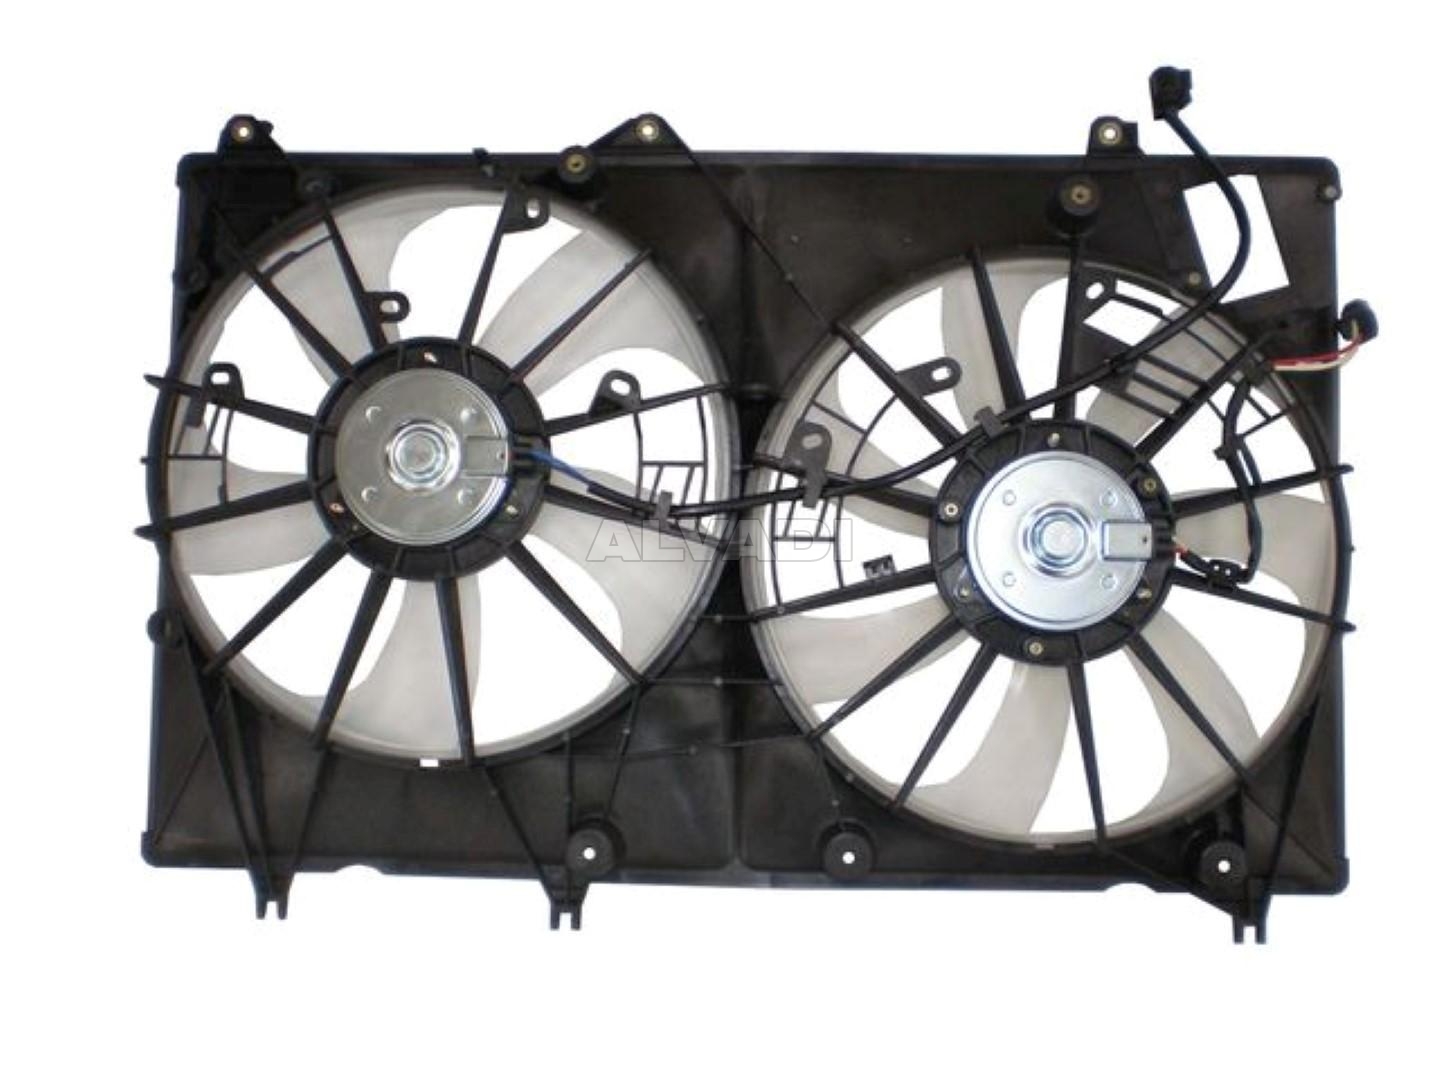 FAN-TY66029A Tong Yang FAN-TY66029A Replacement Radiator/Condenser Cooling Fan Assembly 01-07 TY Lexs RX300/HIGHLANDER 01-07 